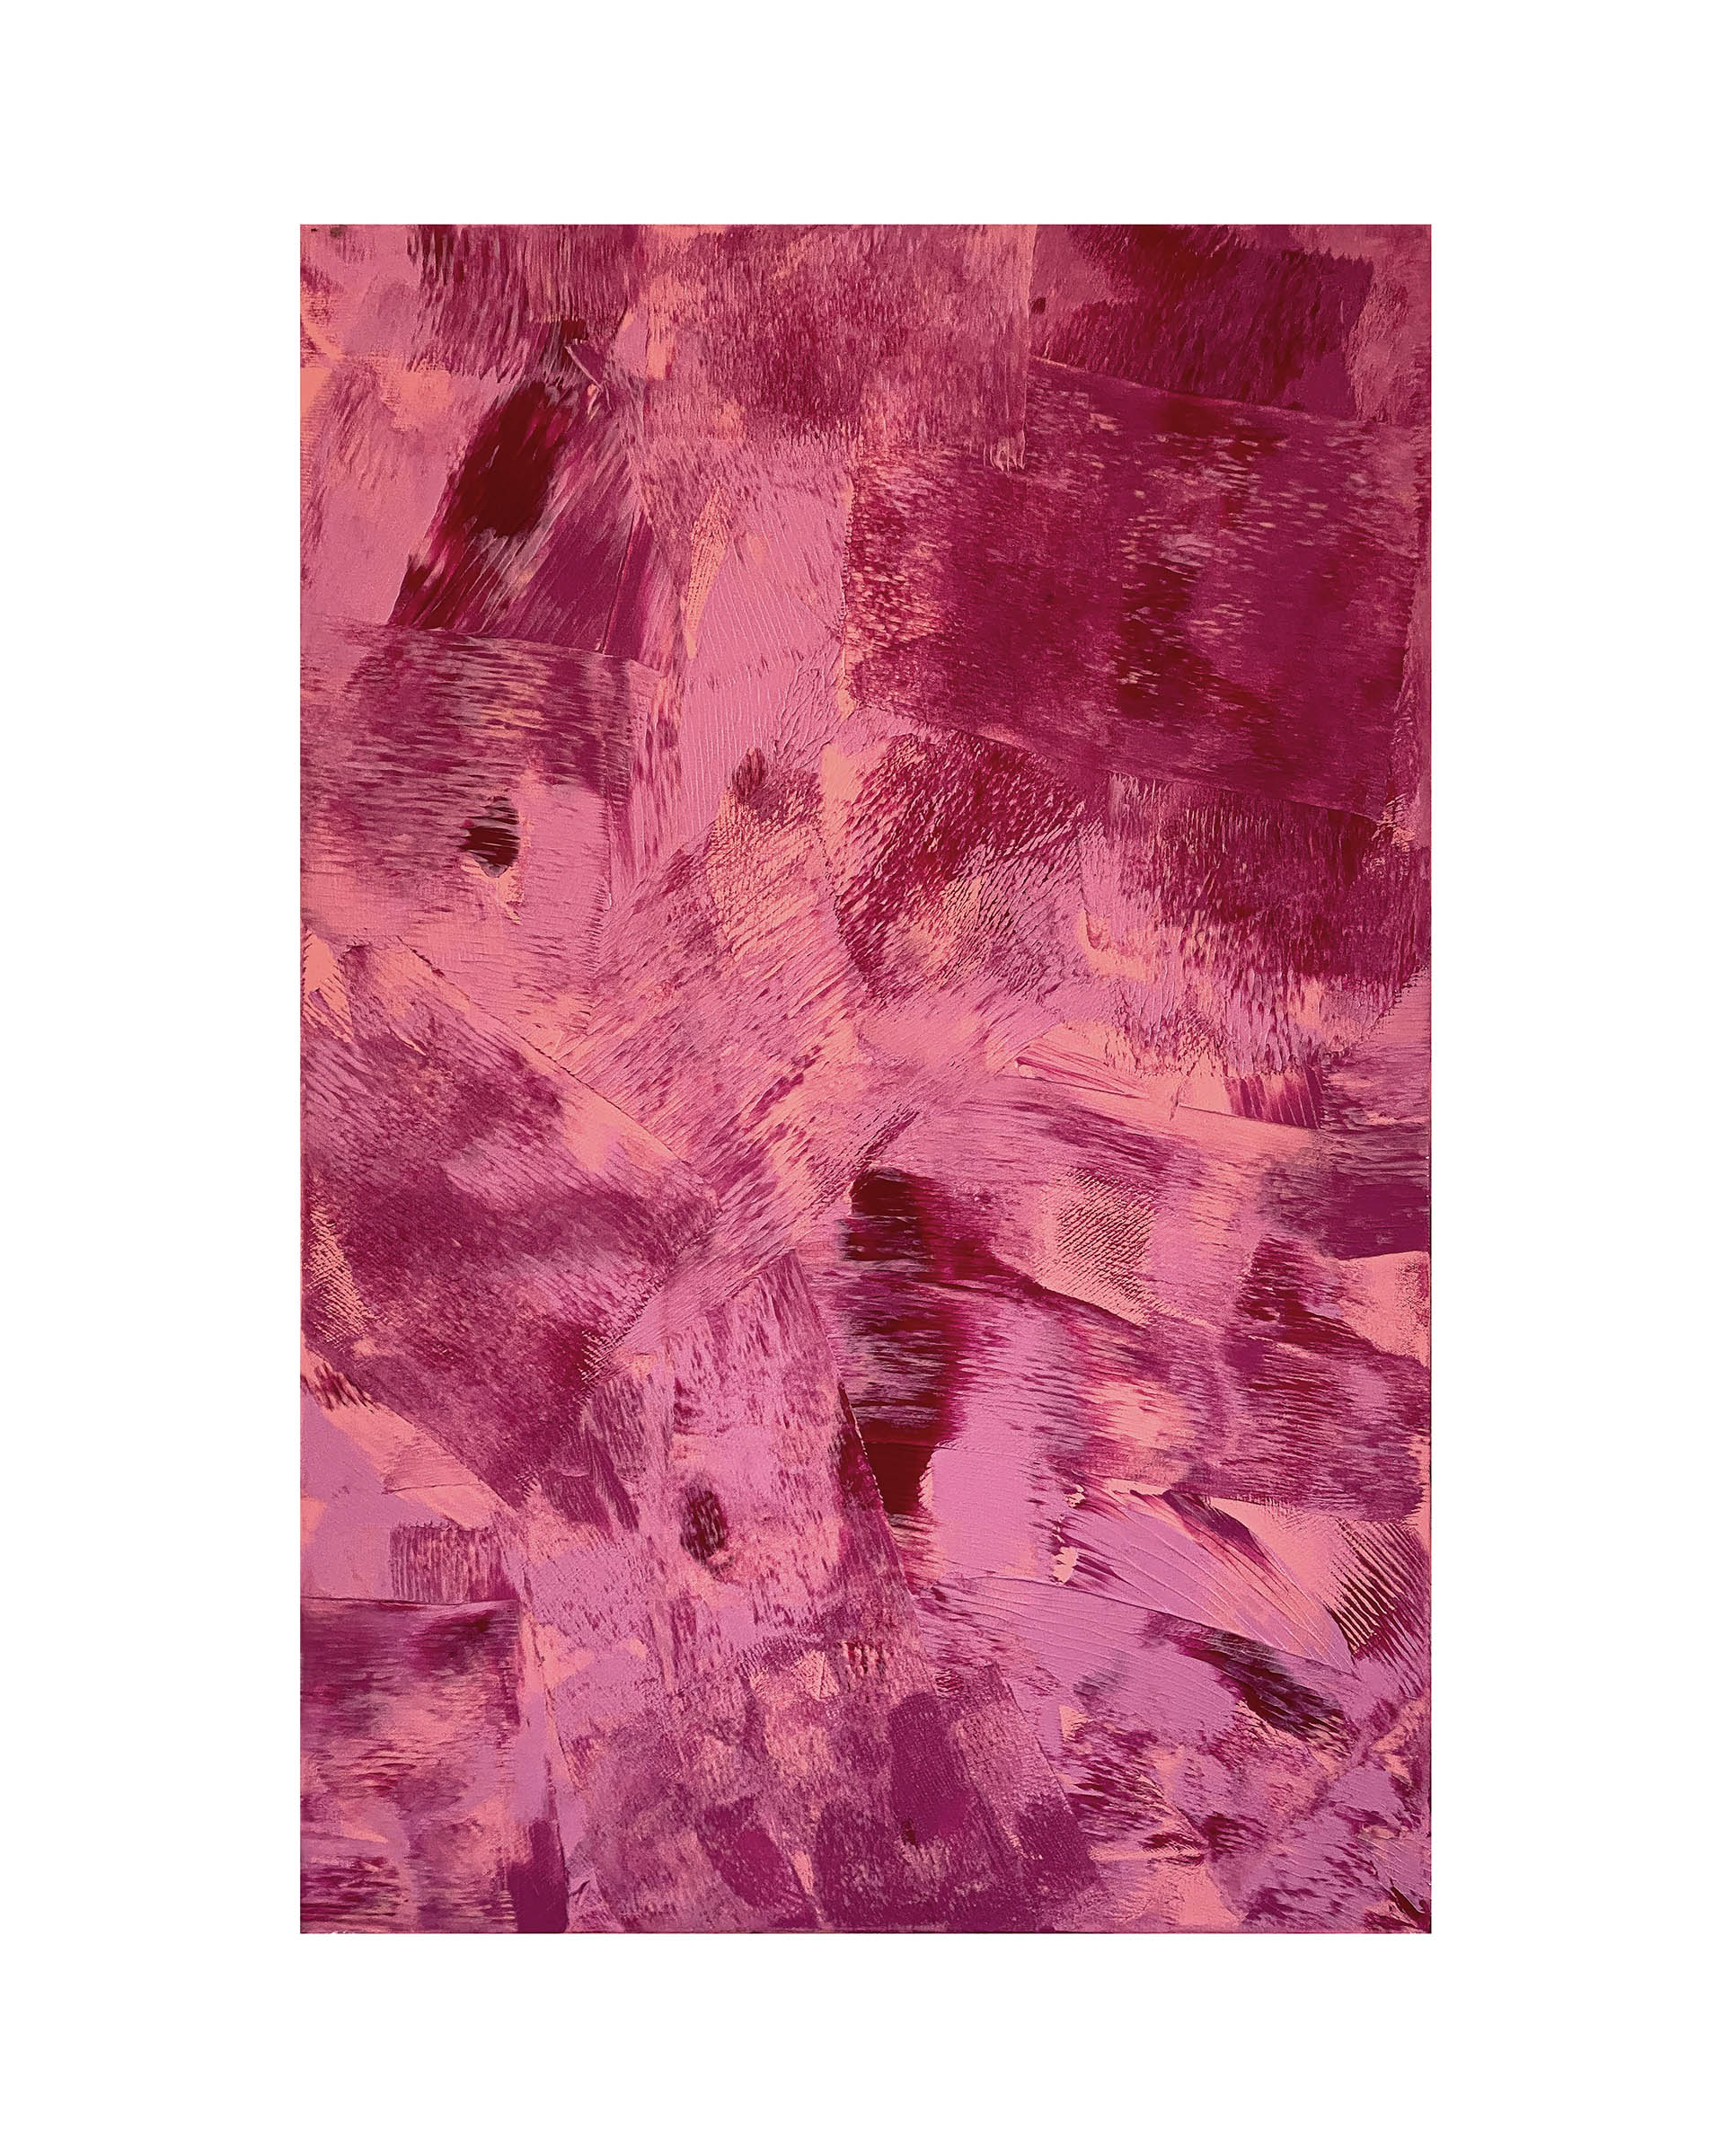 Photograph of the painting Petty in Pink